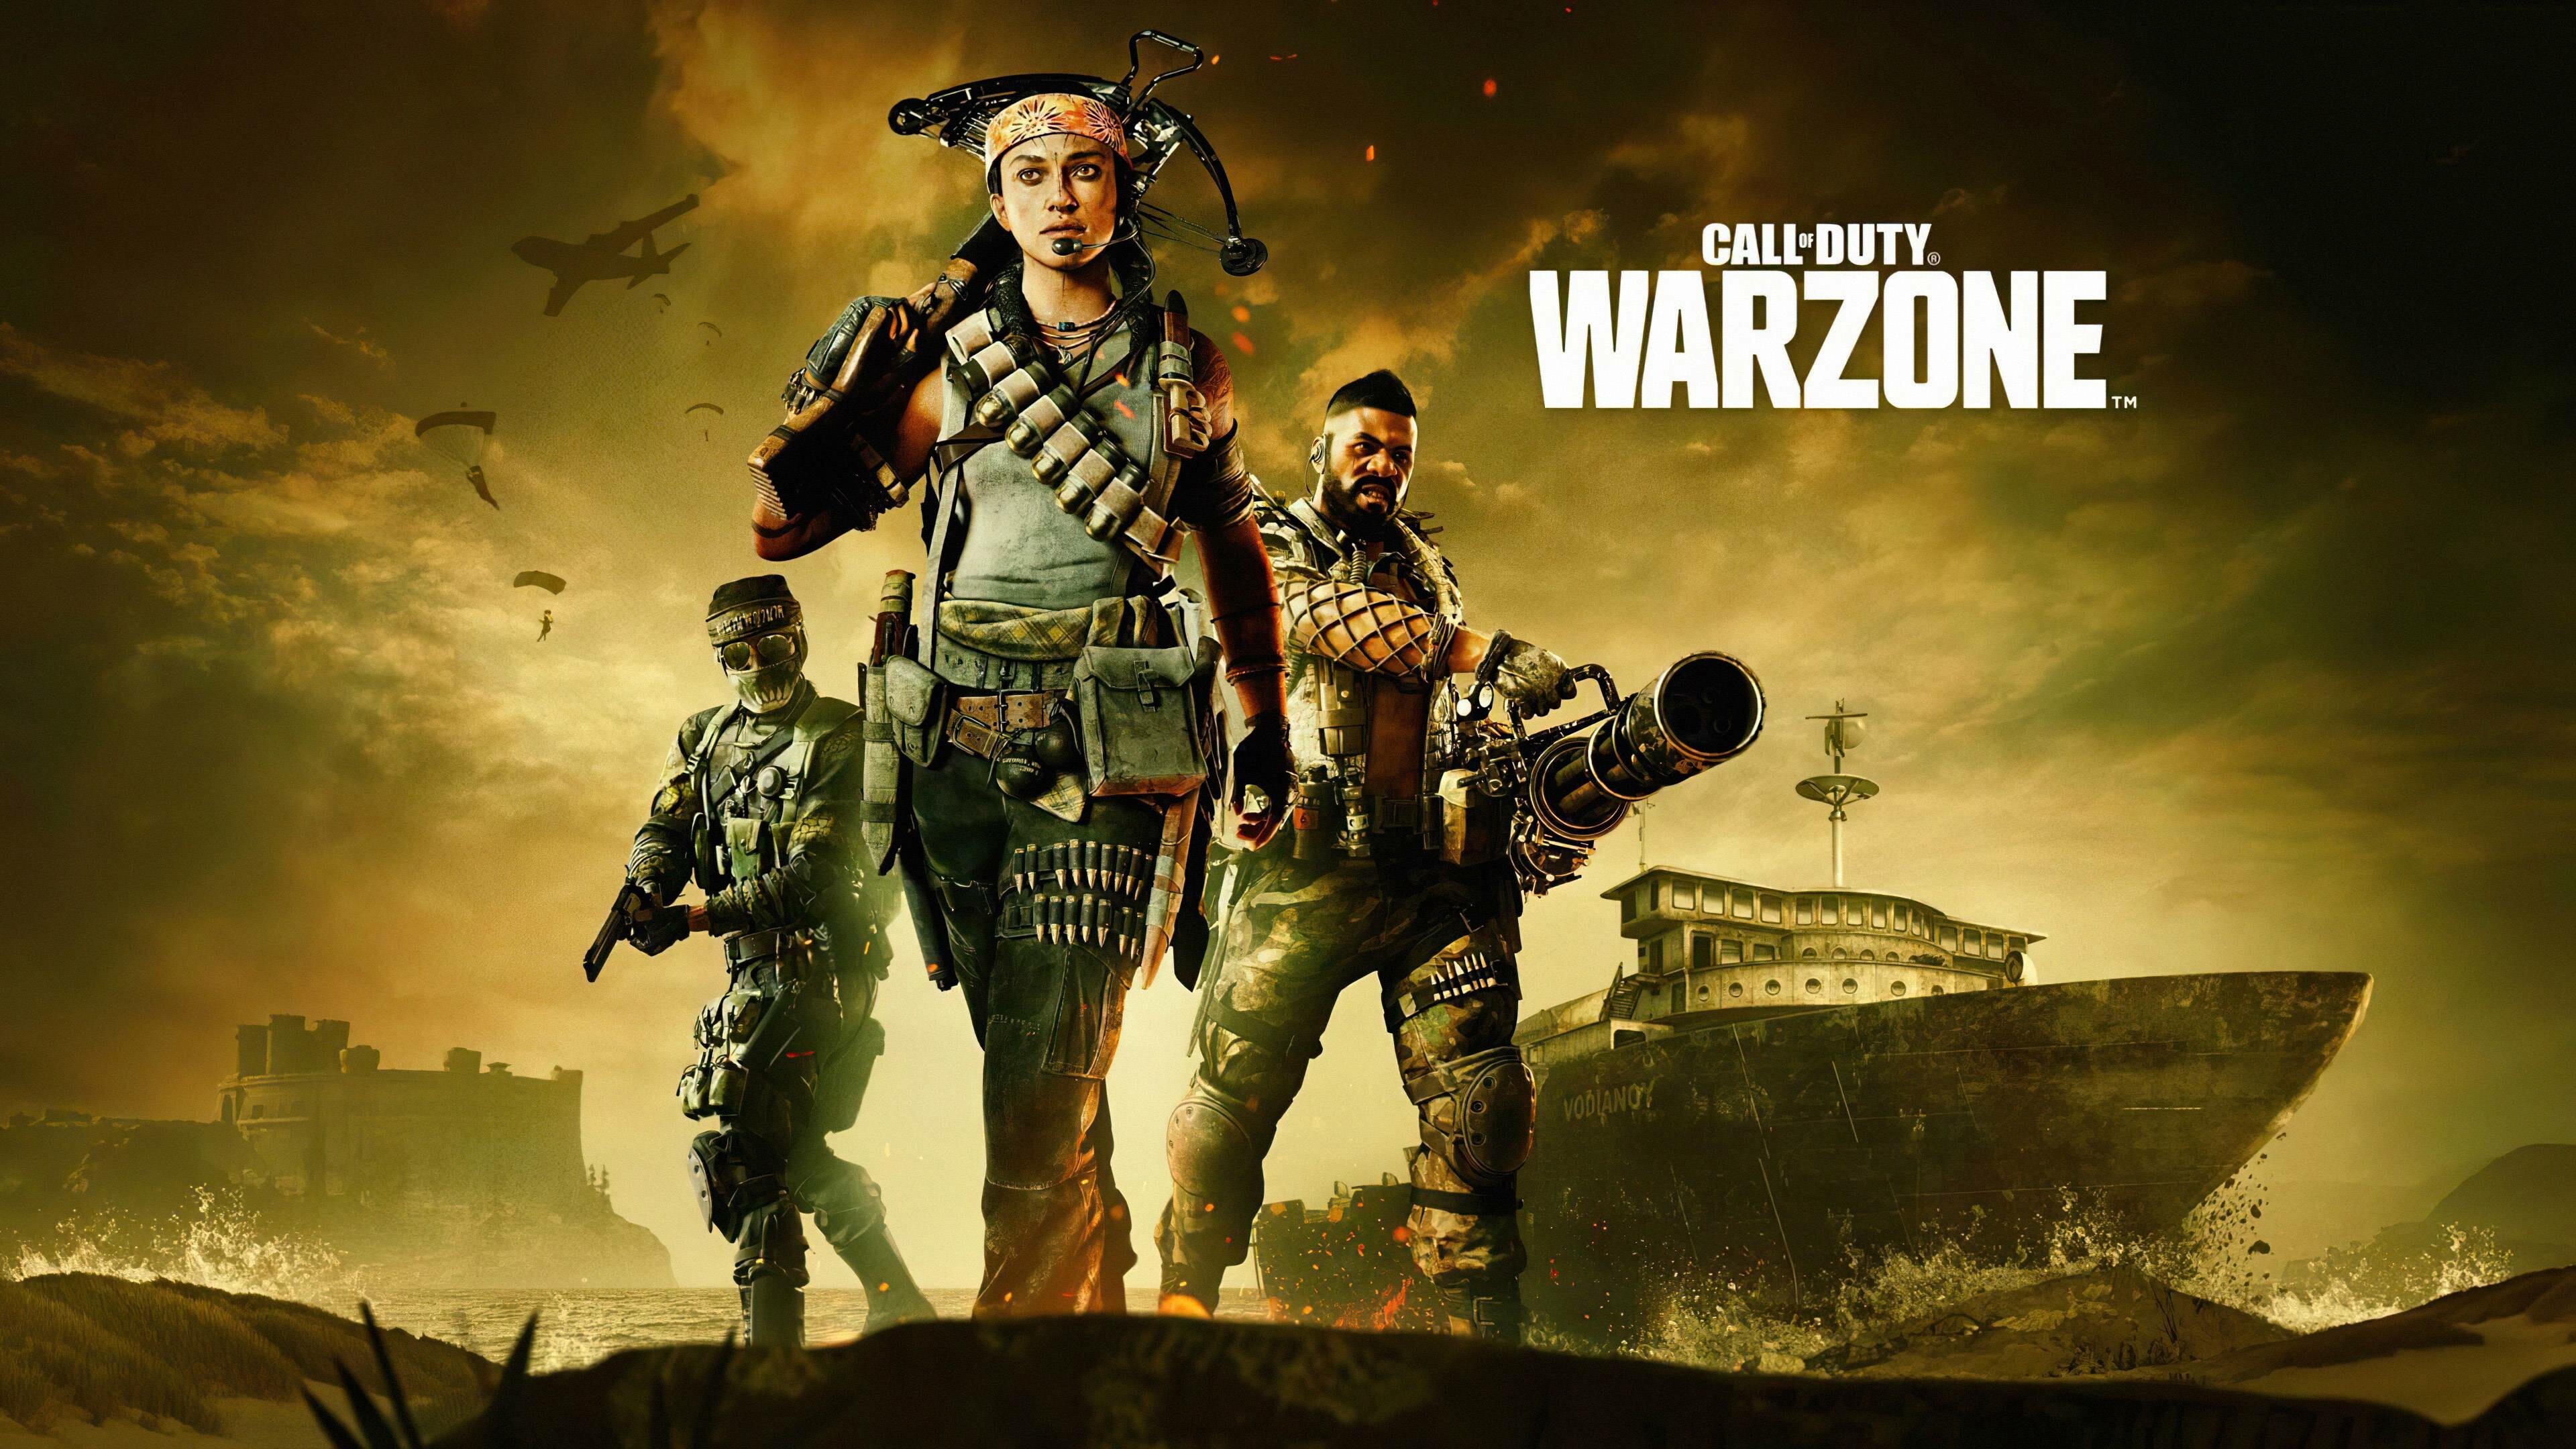 Warzone, Action-packed game, HD wallpapers, 3840x2160 4K Desktop